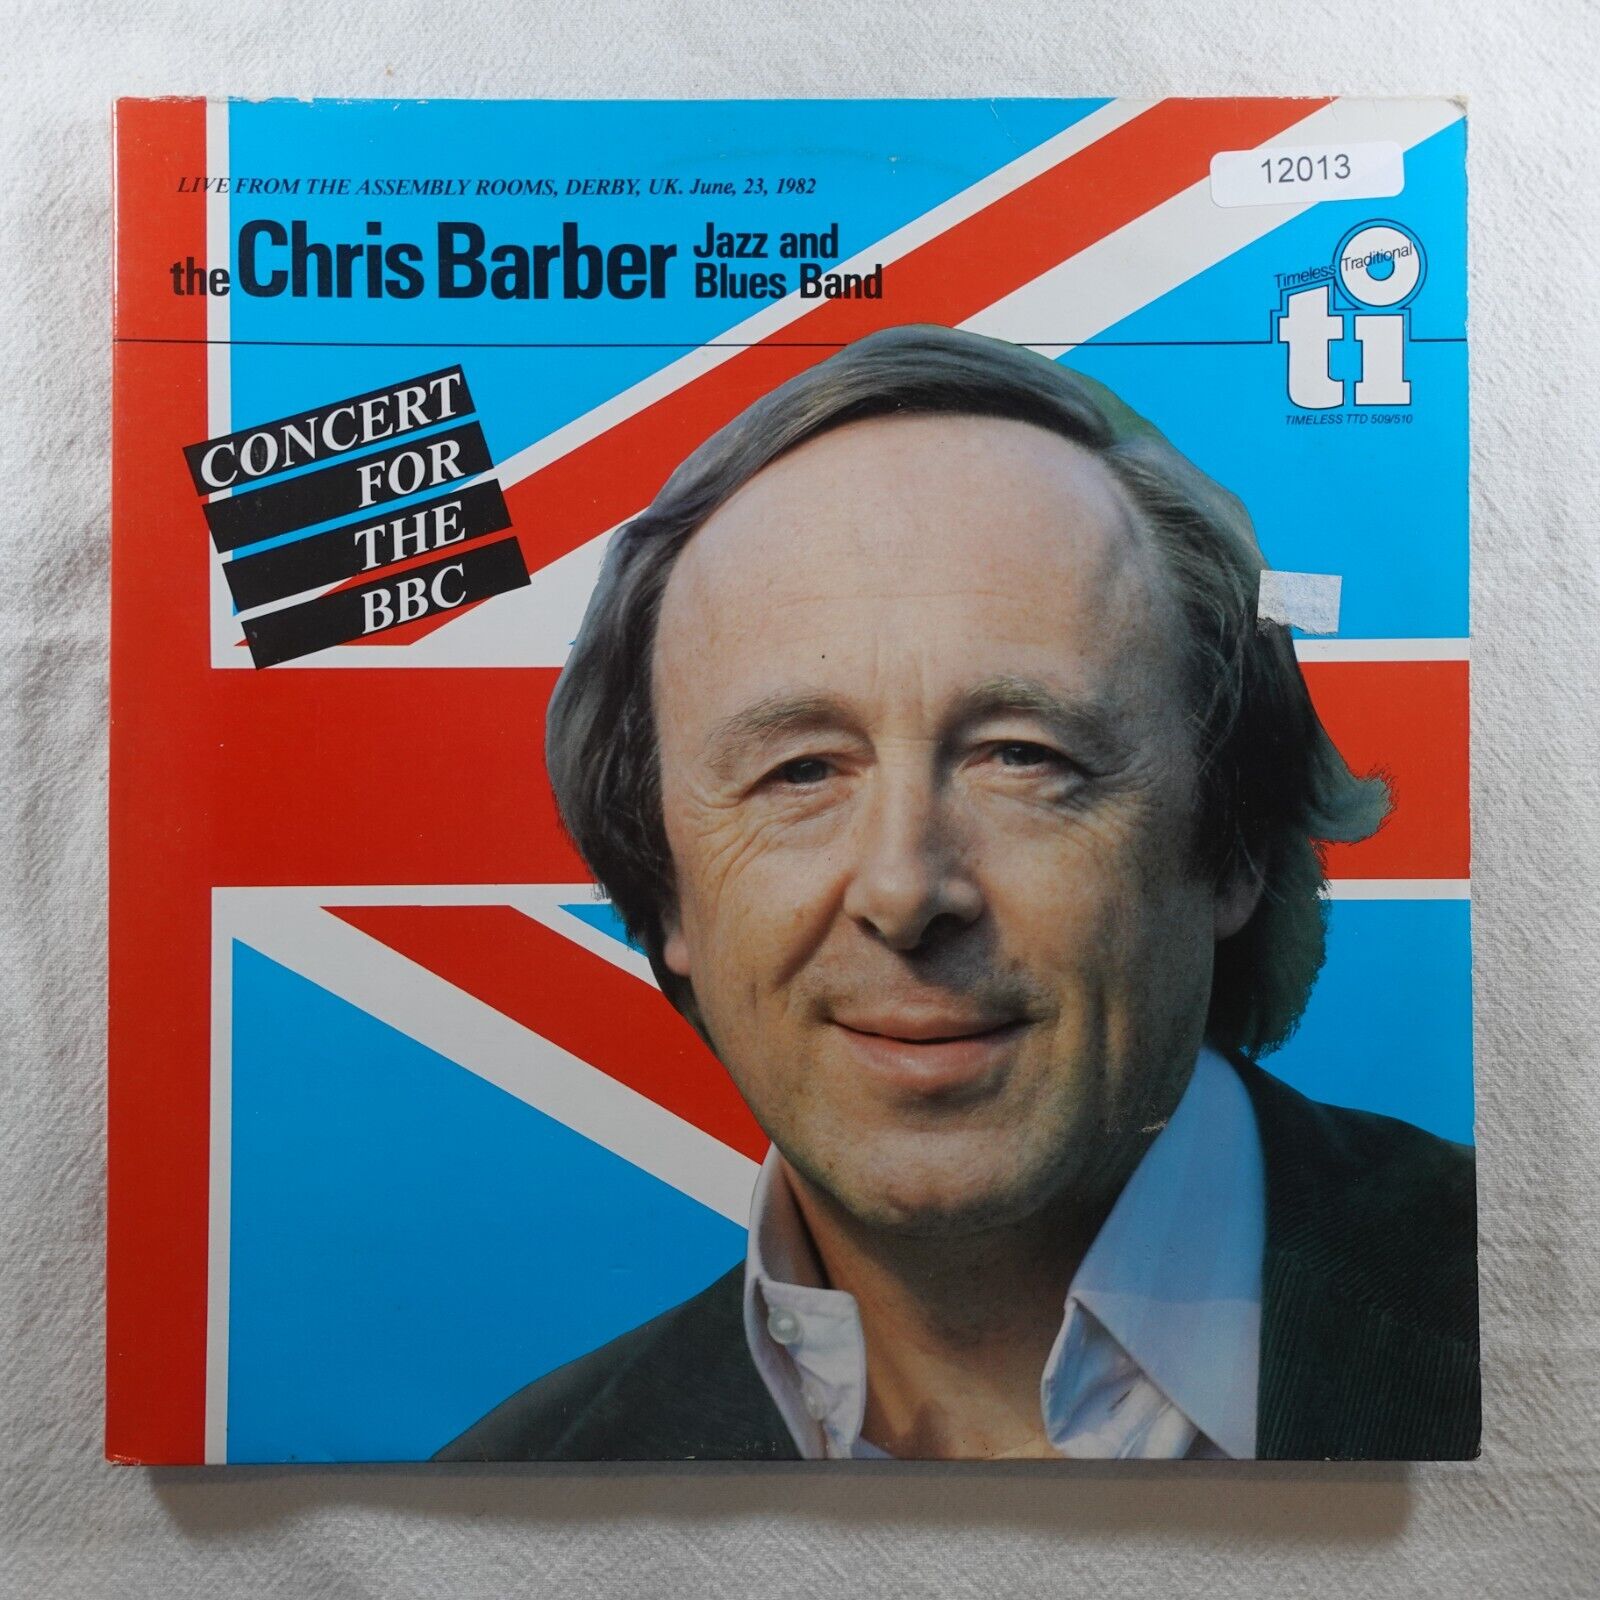 The Chris Barber Jazz And Blues Band Concert For The Bbc   Record Album Vinyl LP